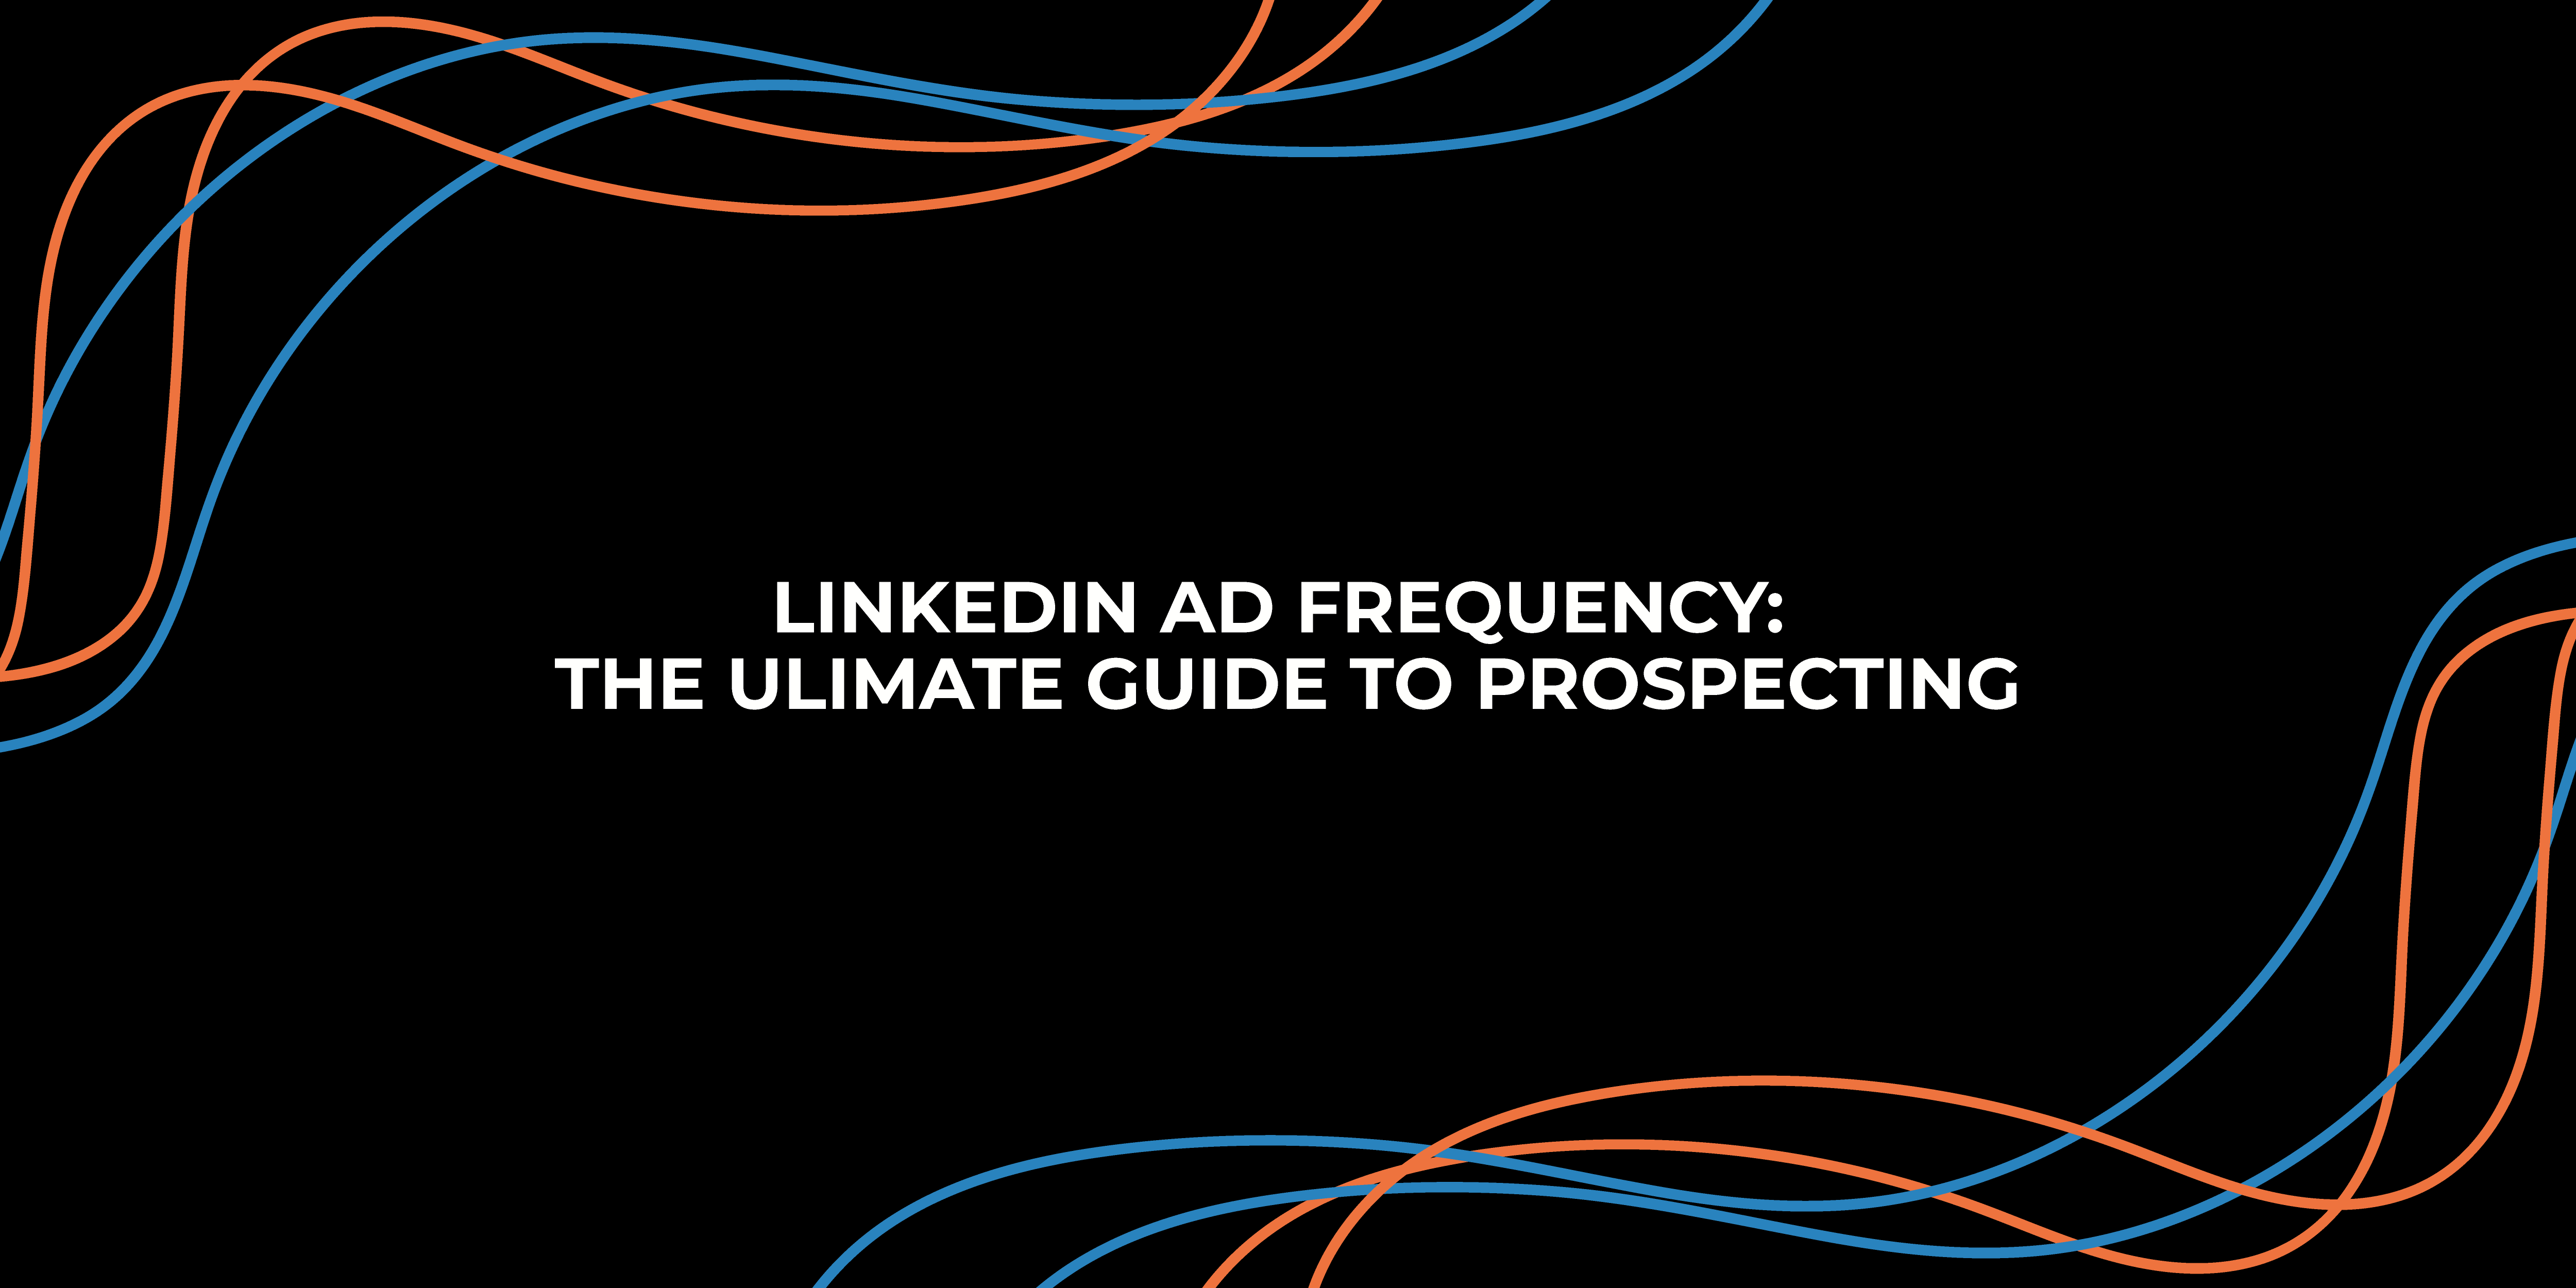 LINKEDIN AD FREQUENCY: THE ULIMATE GUIDE TO PROSPECTING